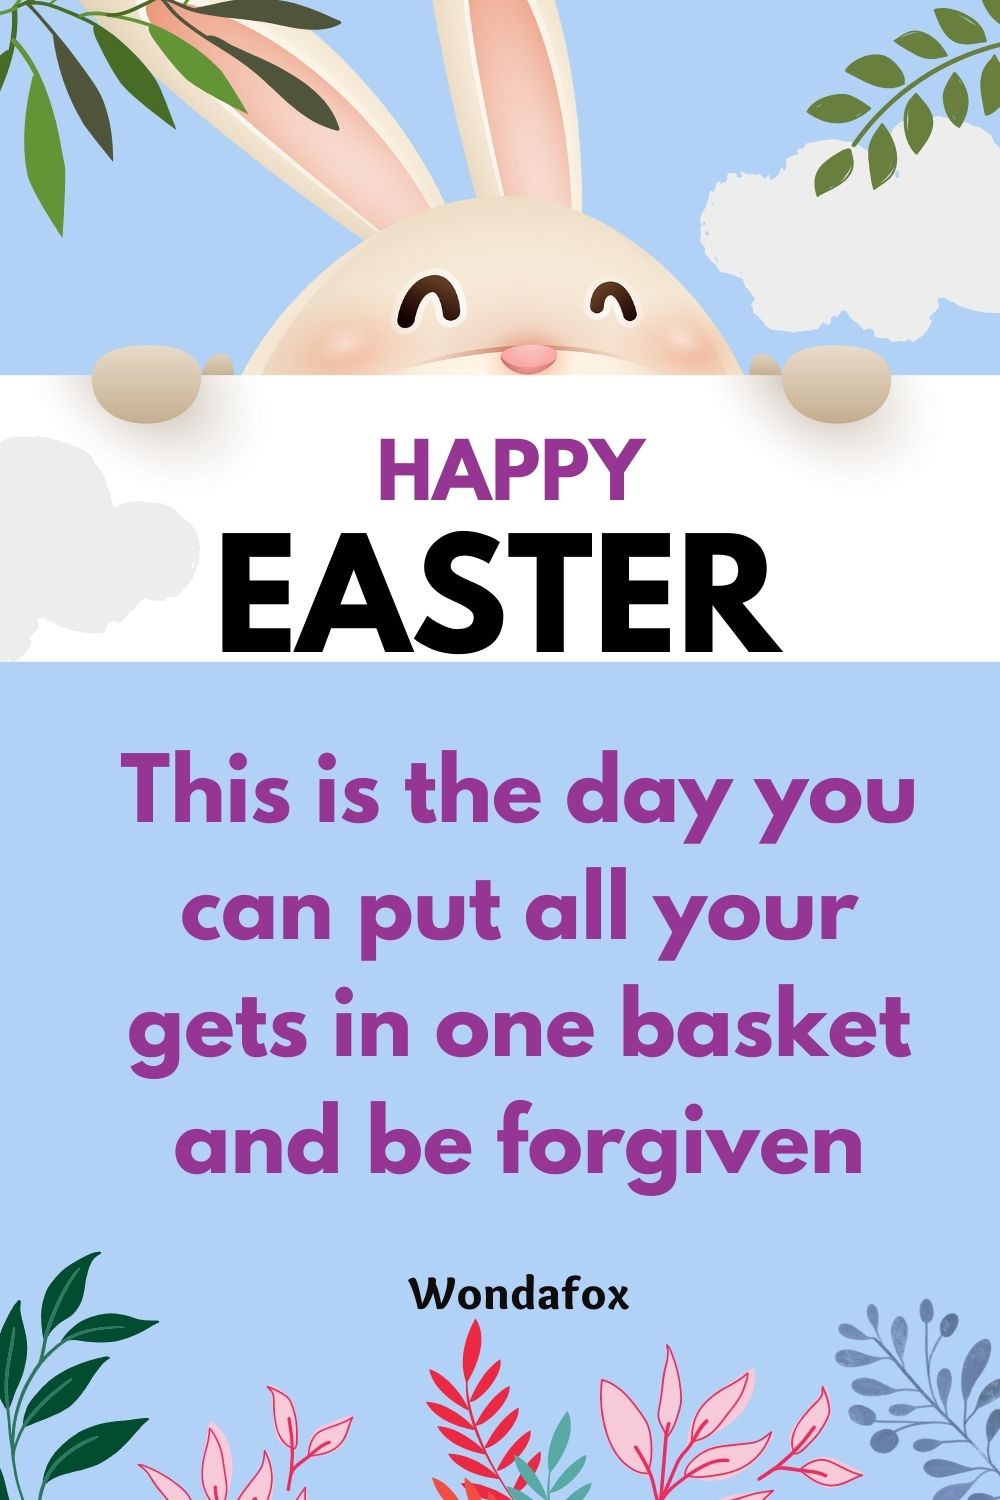 Happy Easter! This is the day you can put all your gets in one basket and be forgiven